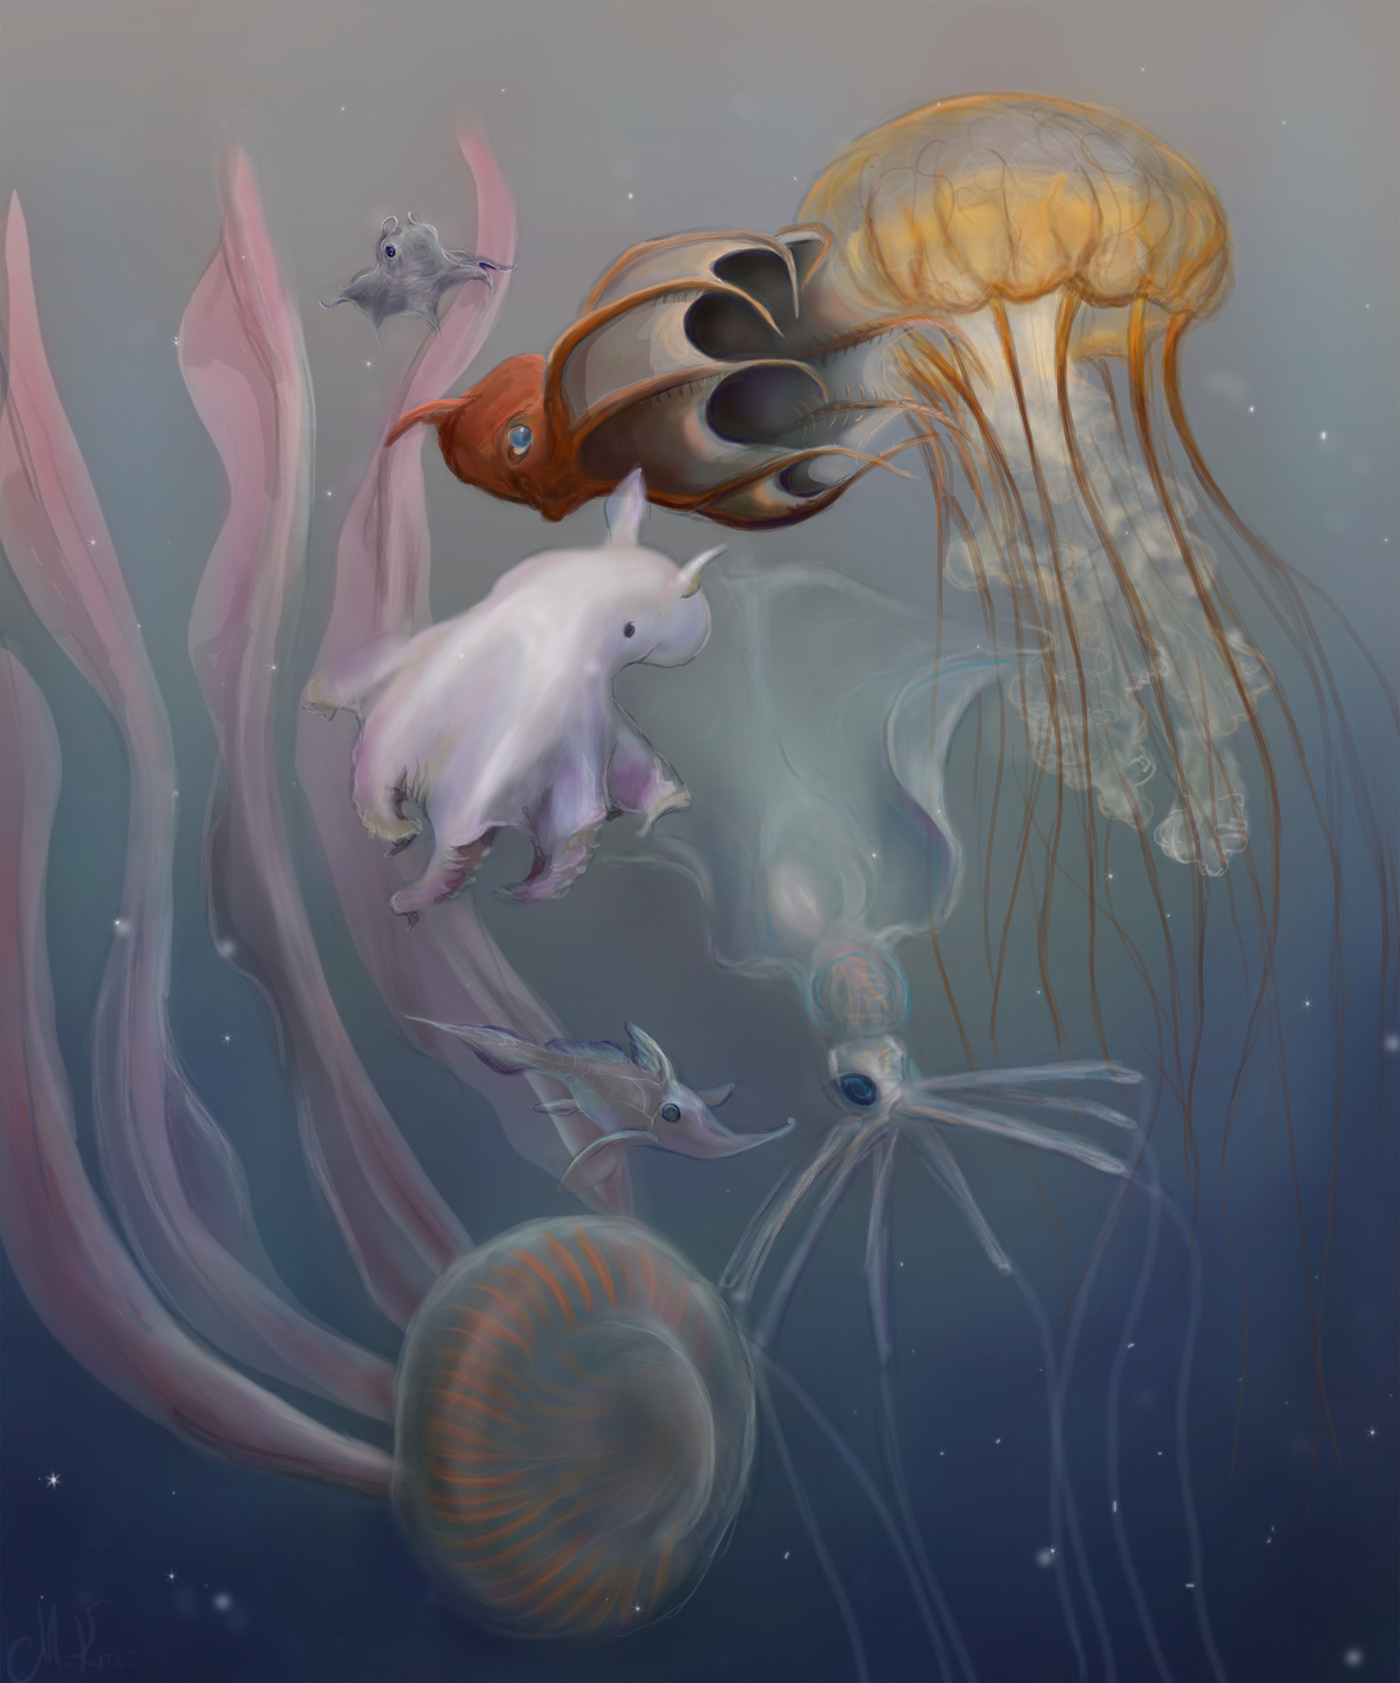 fish animals water sea dolphin Ocean Whale jellyfish